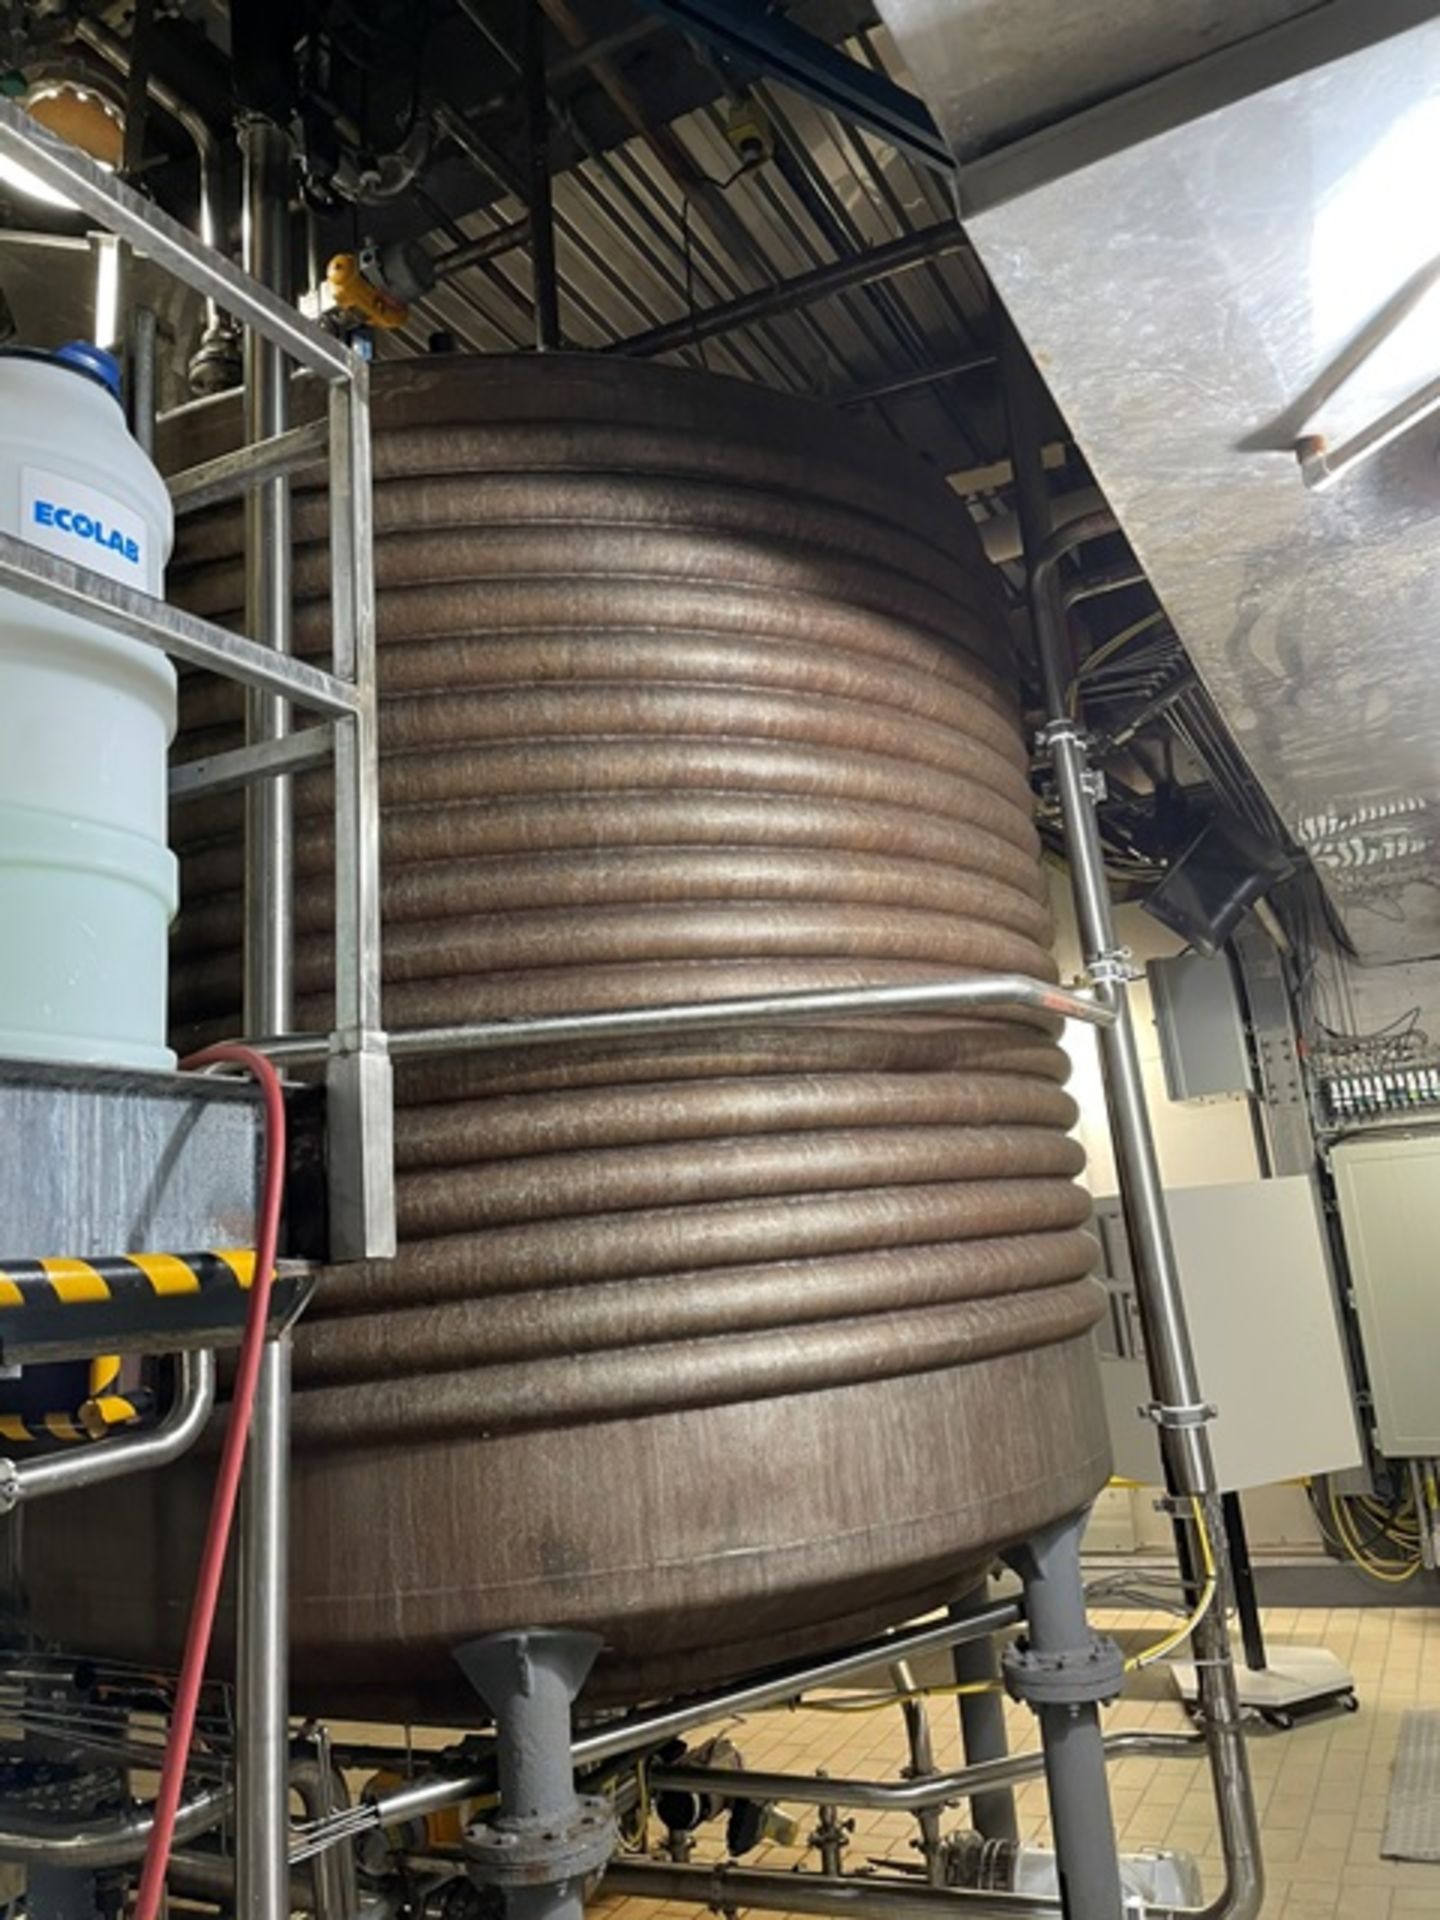 Tank - Stainless Steel Jacketed Tank, 8' Dia. X 9', Includes Lightnin Mixer - Image 3 of 3